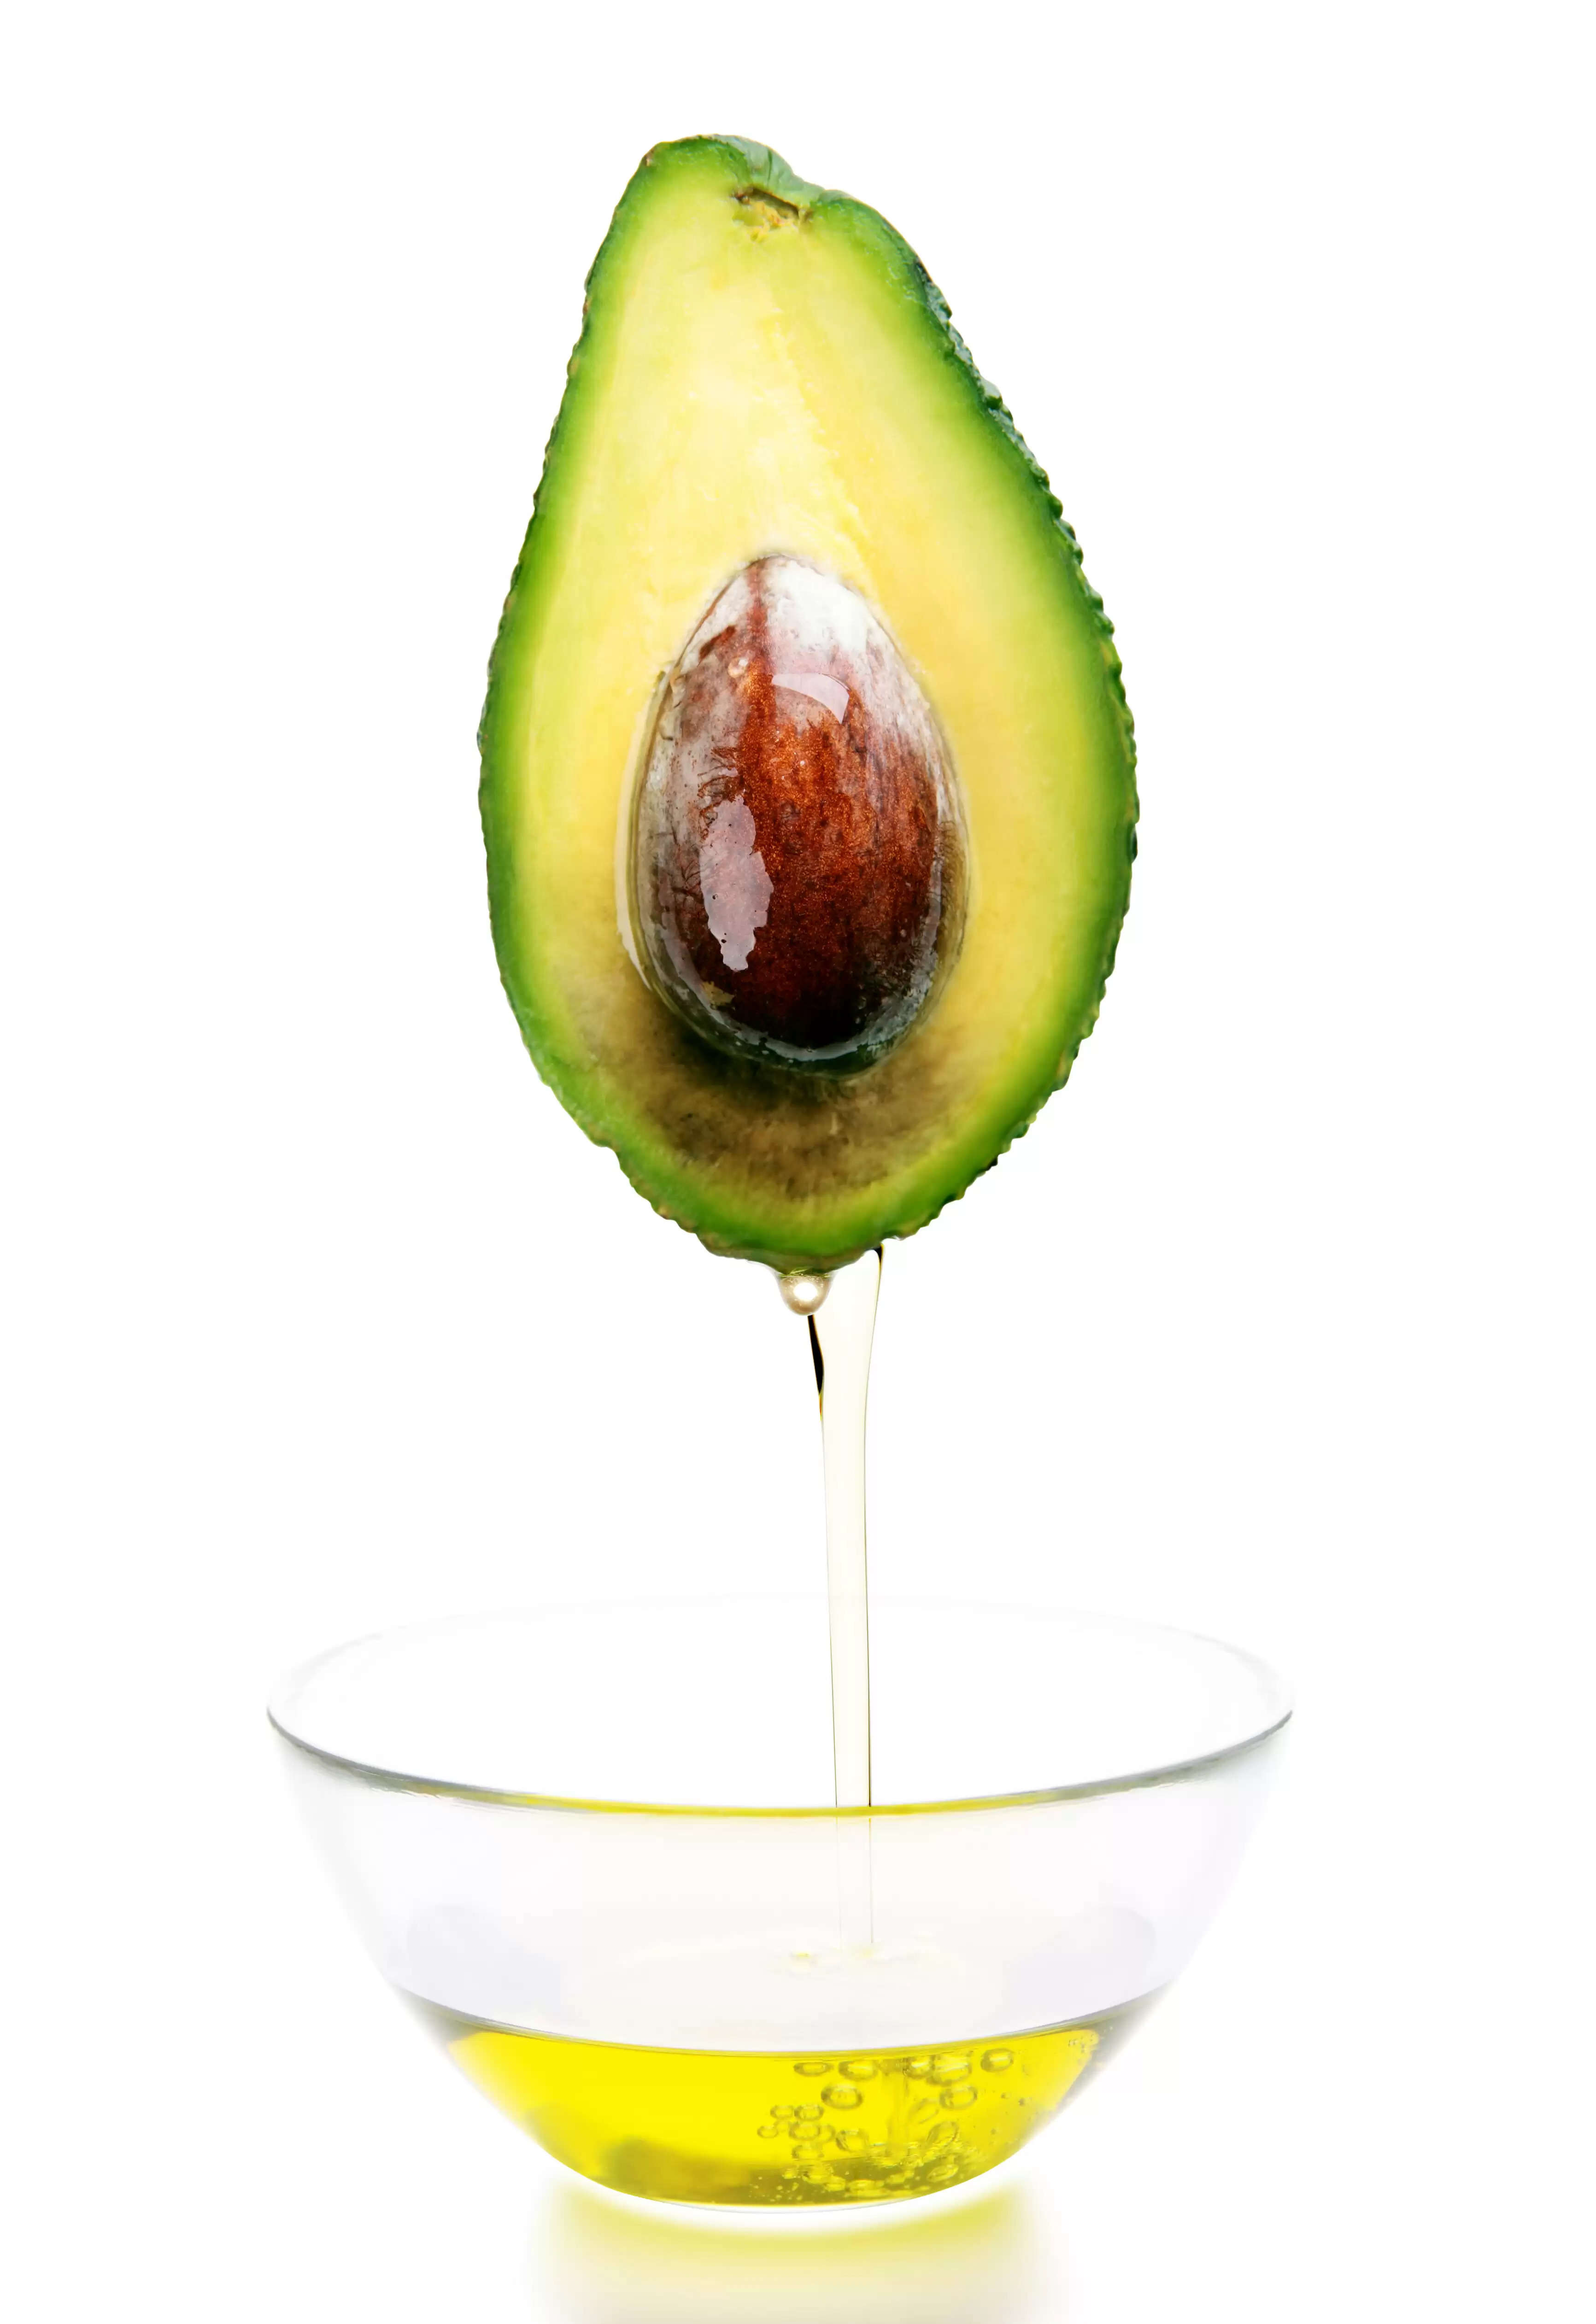 Avocado Oil Benefits for Hair: What to Expect & How to Use It